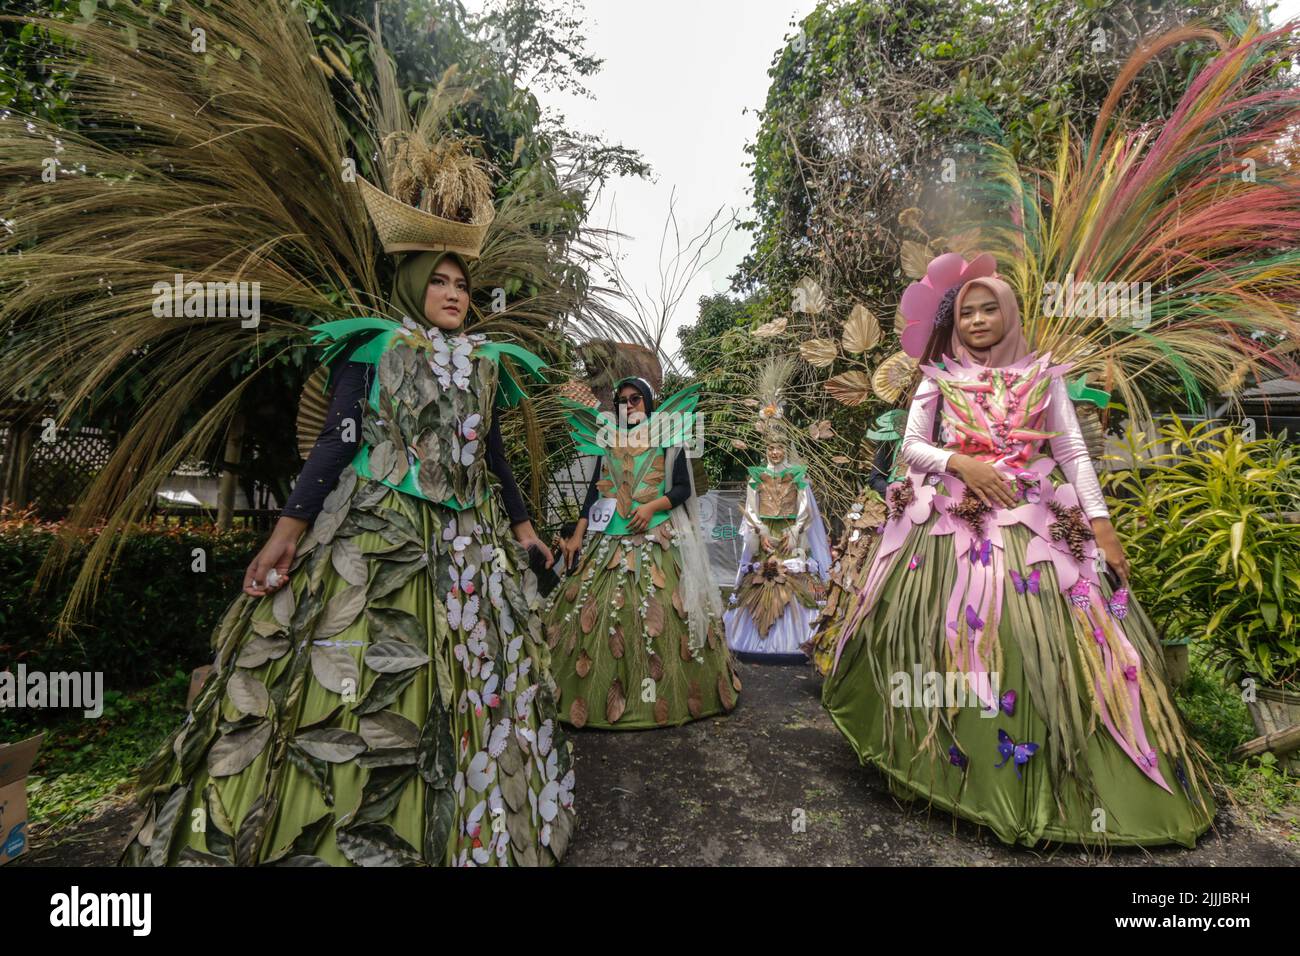 A woman in nature dress made from leaves, flowers, roots, participate in a nature fashion parade 'Back To Nature Cultural Preservation' Stock Photo